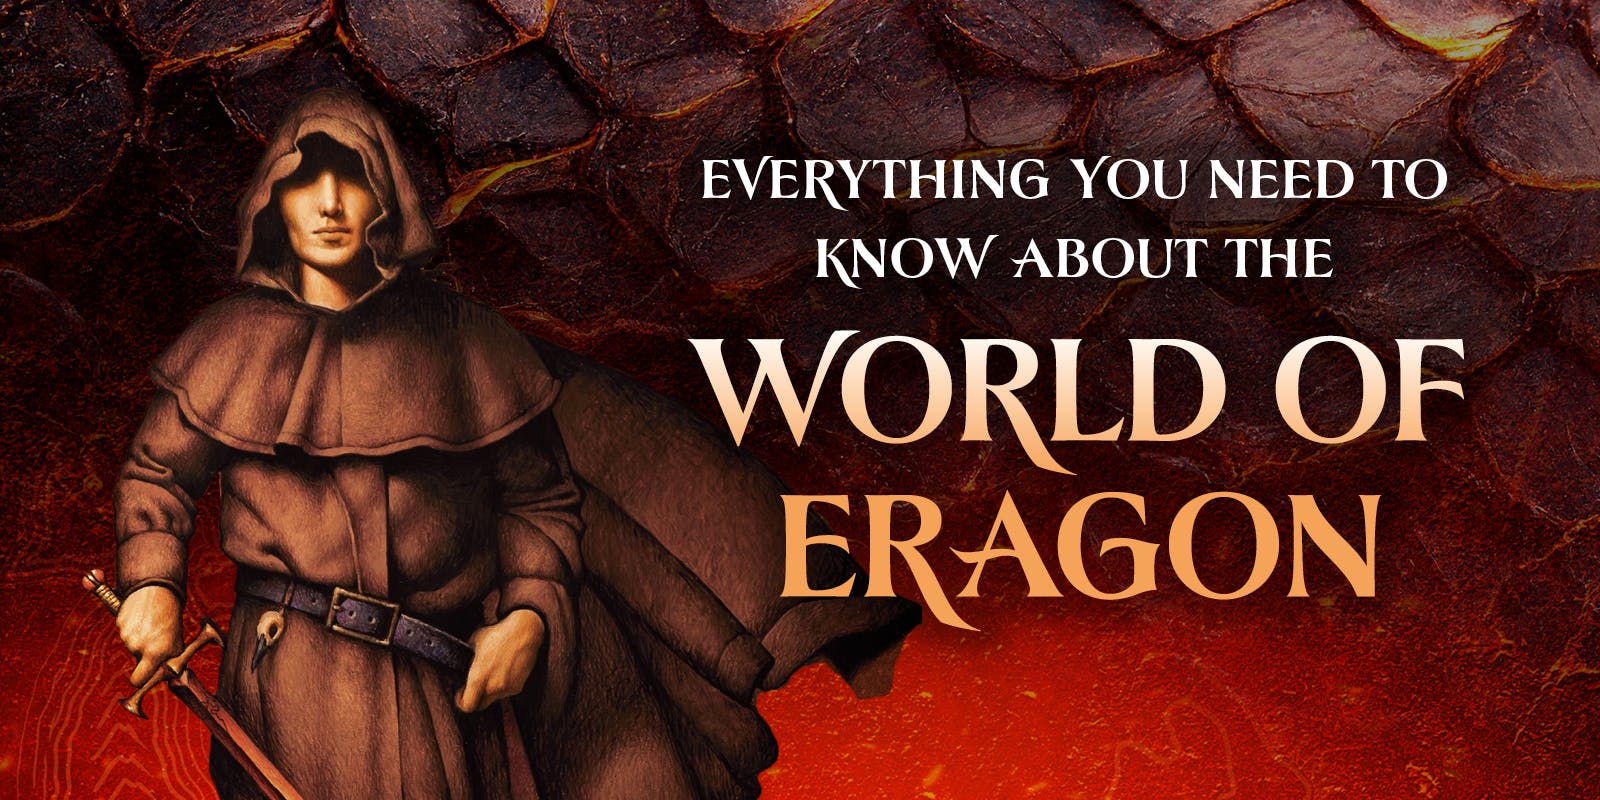 Everything you need to know about the Inheritance Cycle series